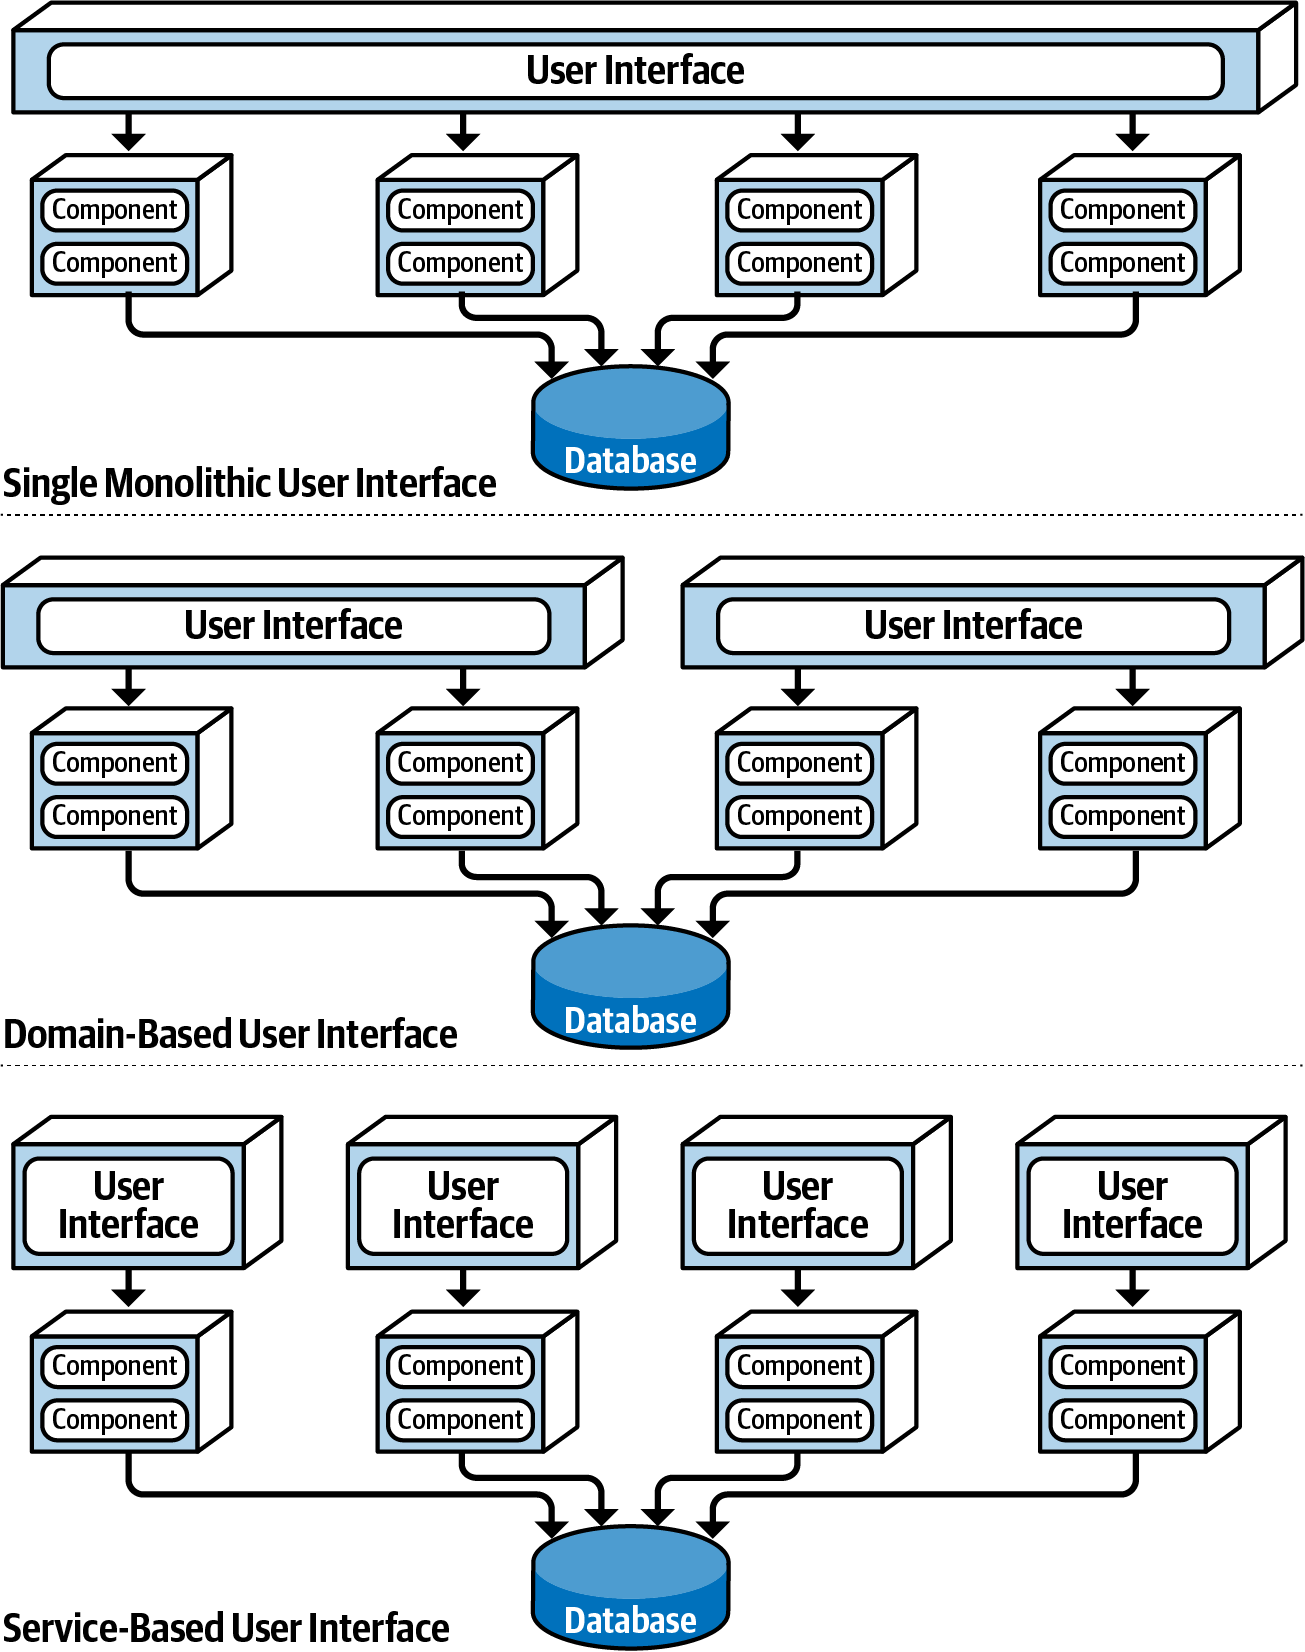 User interface variants from Fundamentals of Software Architecture.